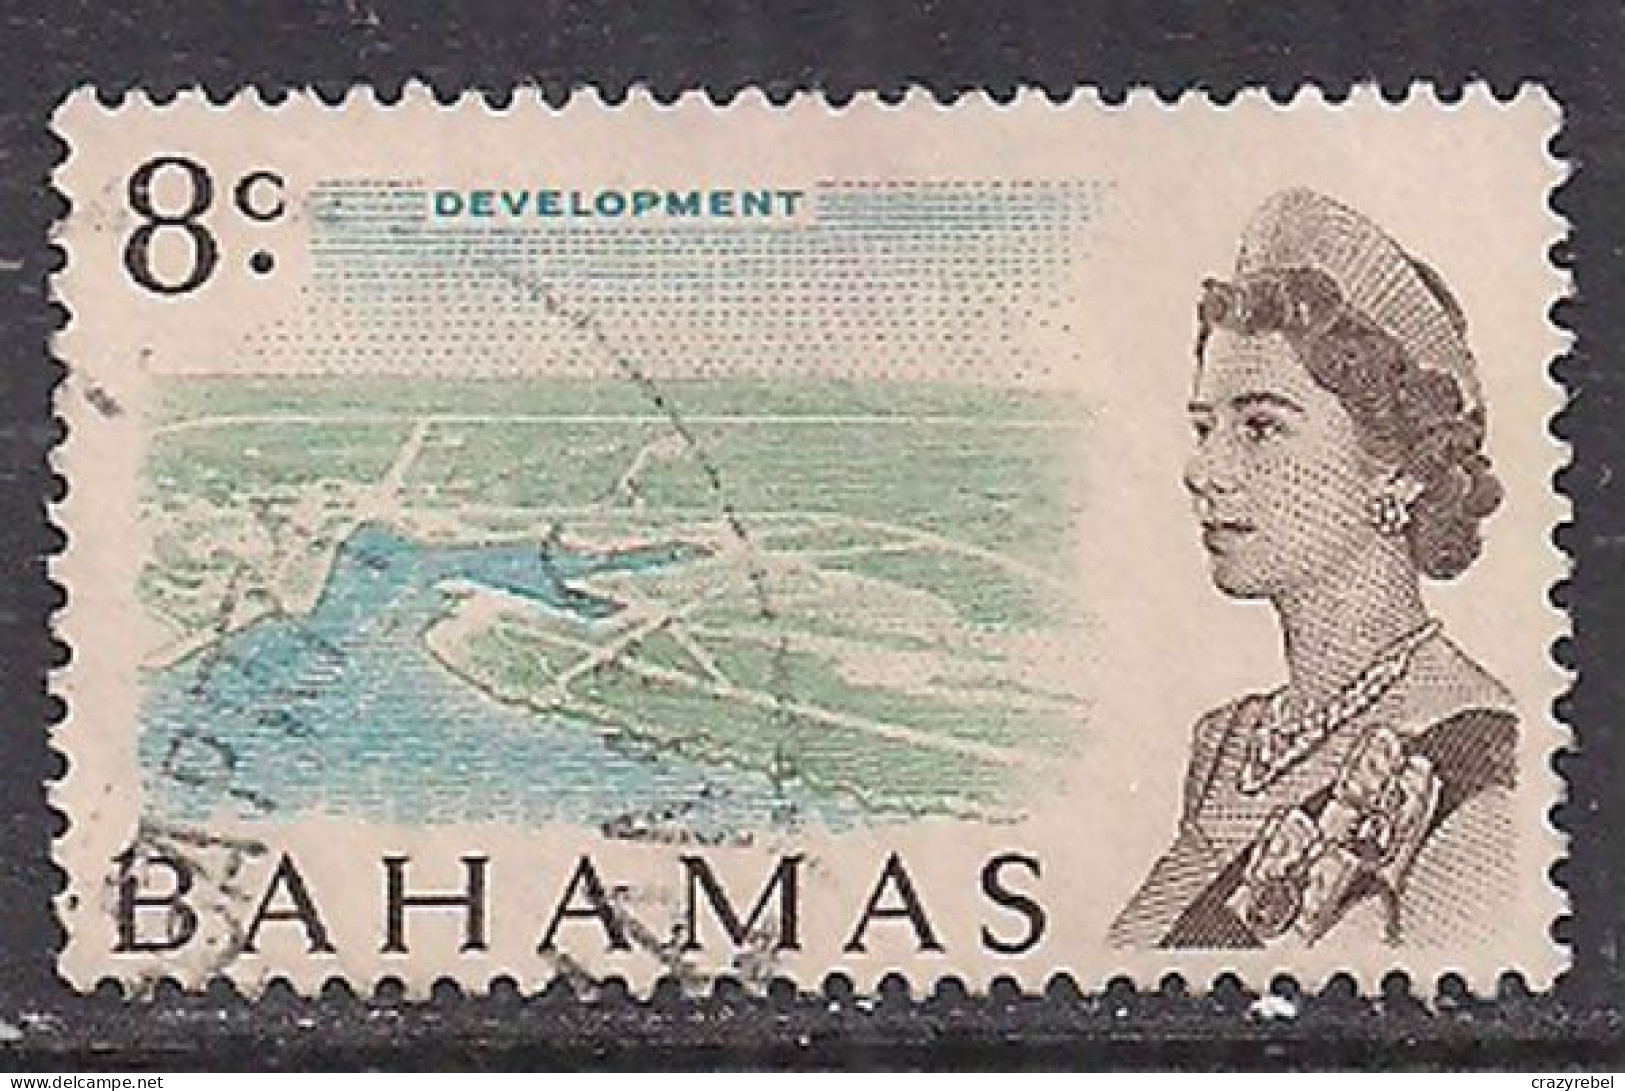 Bahamas 1967/71 QE2 8cents Ocean SG 300 Used ( F284 ) - 1963-1973 Ministerial Government